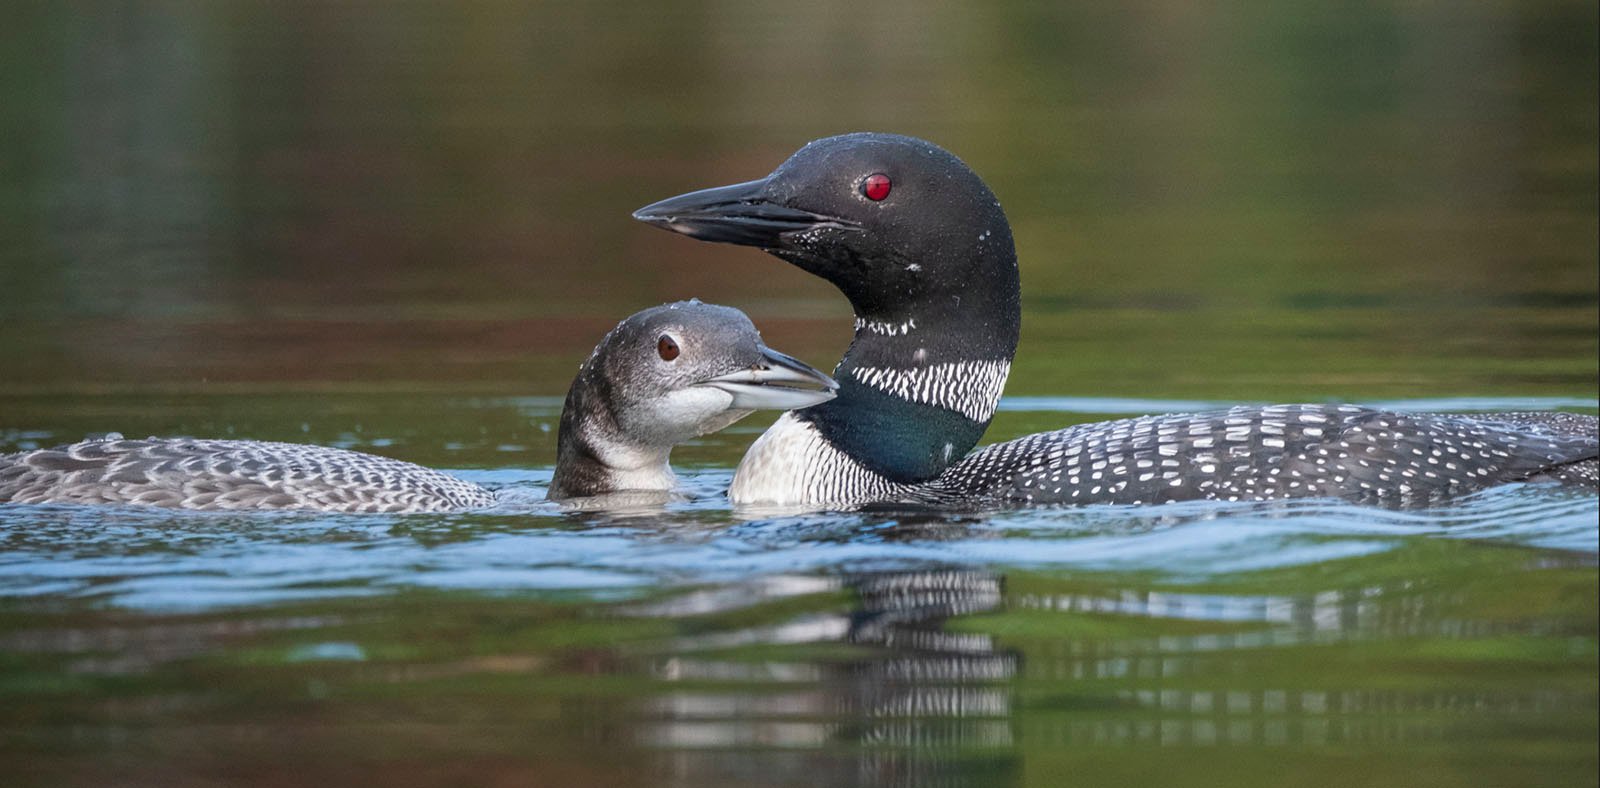 Two common loons swimming in a lake, one adult with striking black and white plumage and red eyes, and a juvenile with more muted gray tones, both visible above calm water.